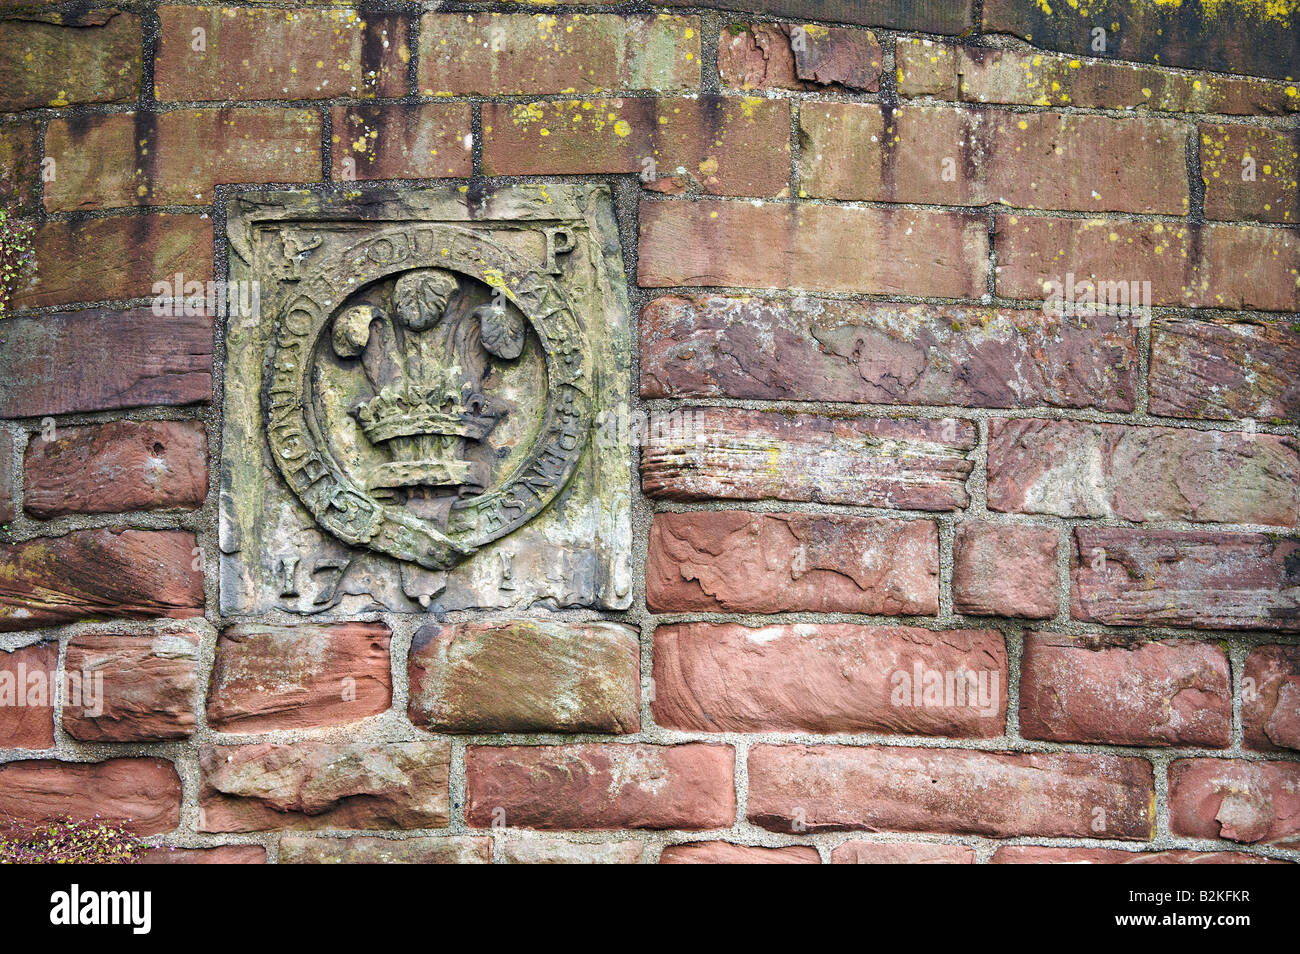 16th century plaque carved with the coat of arms of the Order of the Garter Chester wall UK Stock Photo